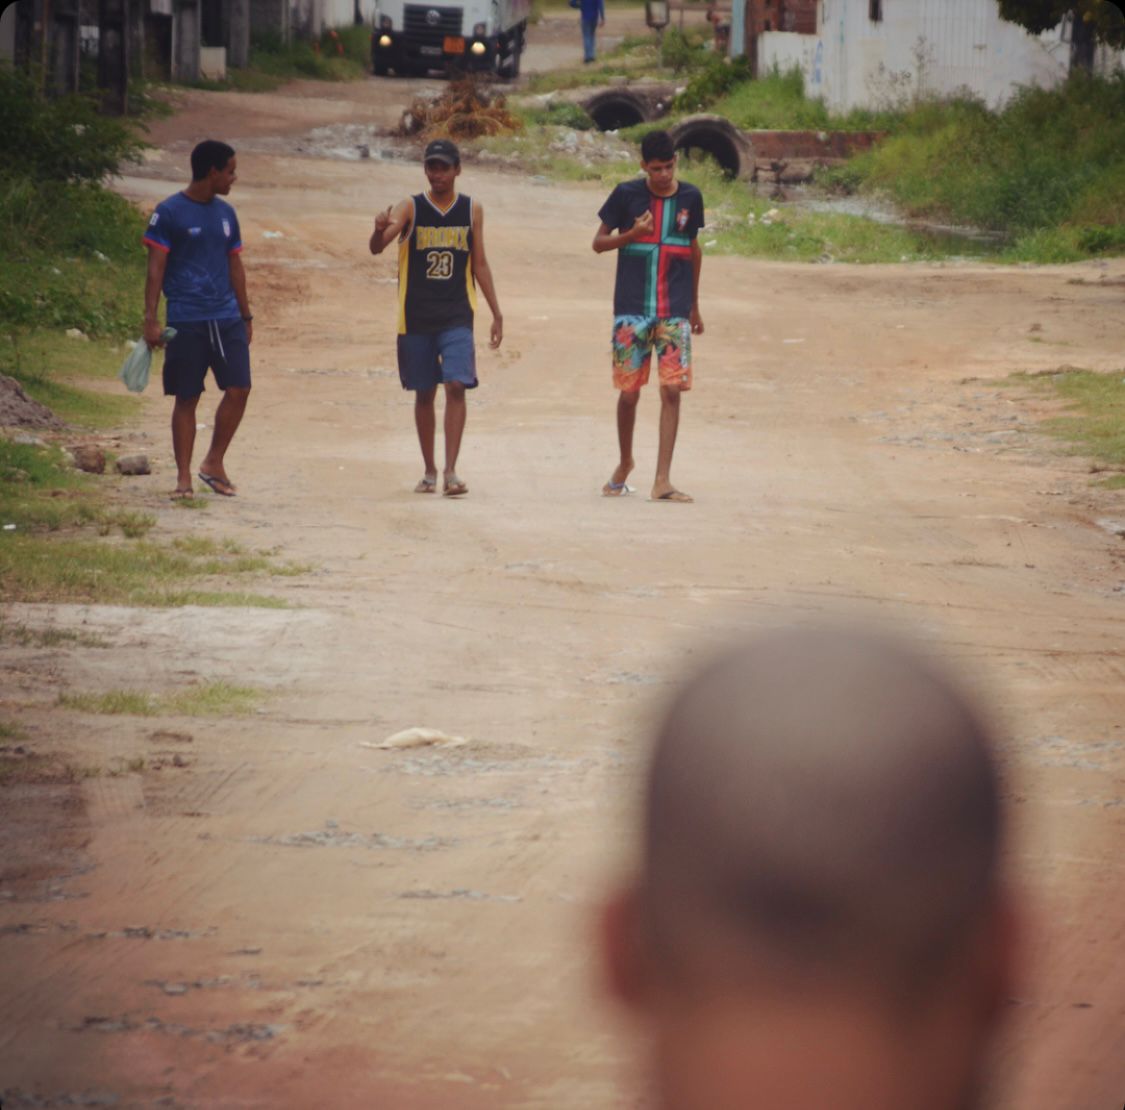 Photo of 3 boys talking to each other and walking on a dirt road